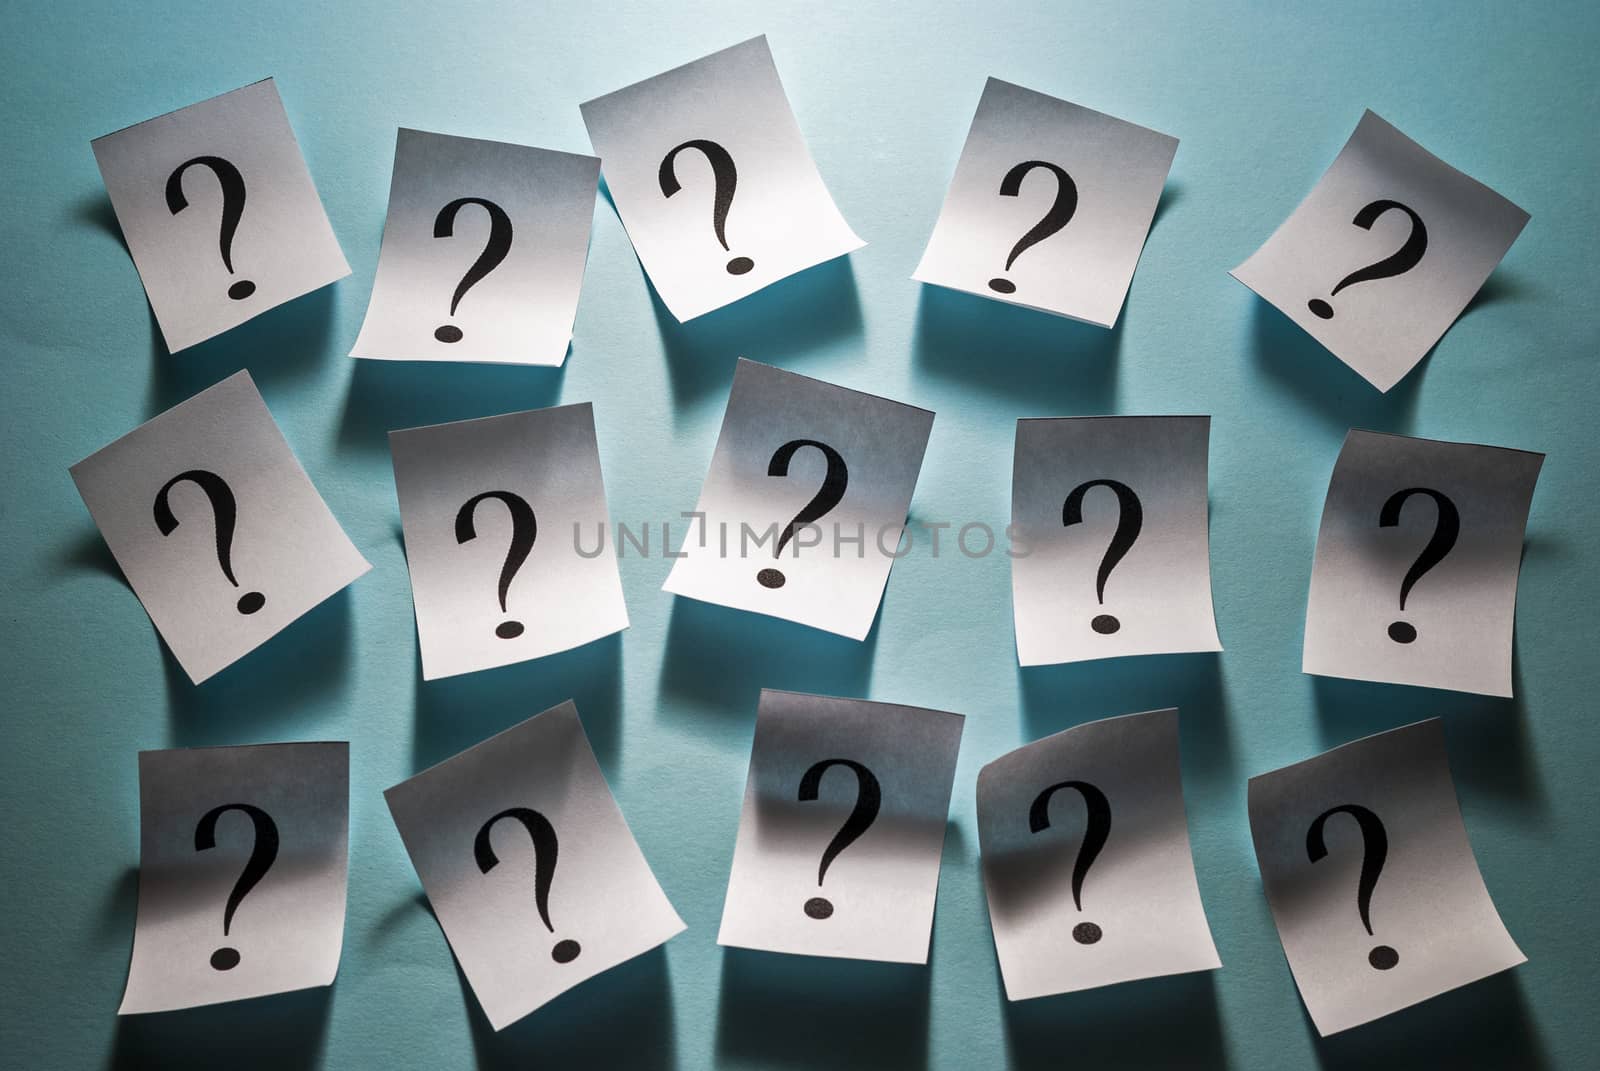 Printed question marks on white cards arranged in rows on a blue background in a full frame view for a conceptual image